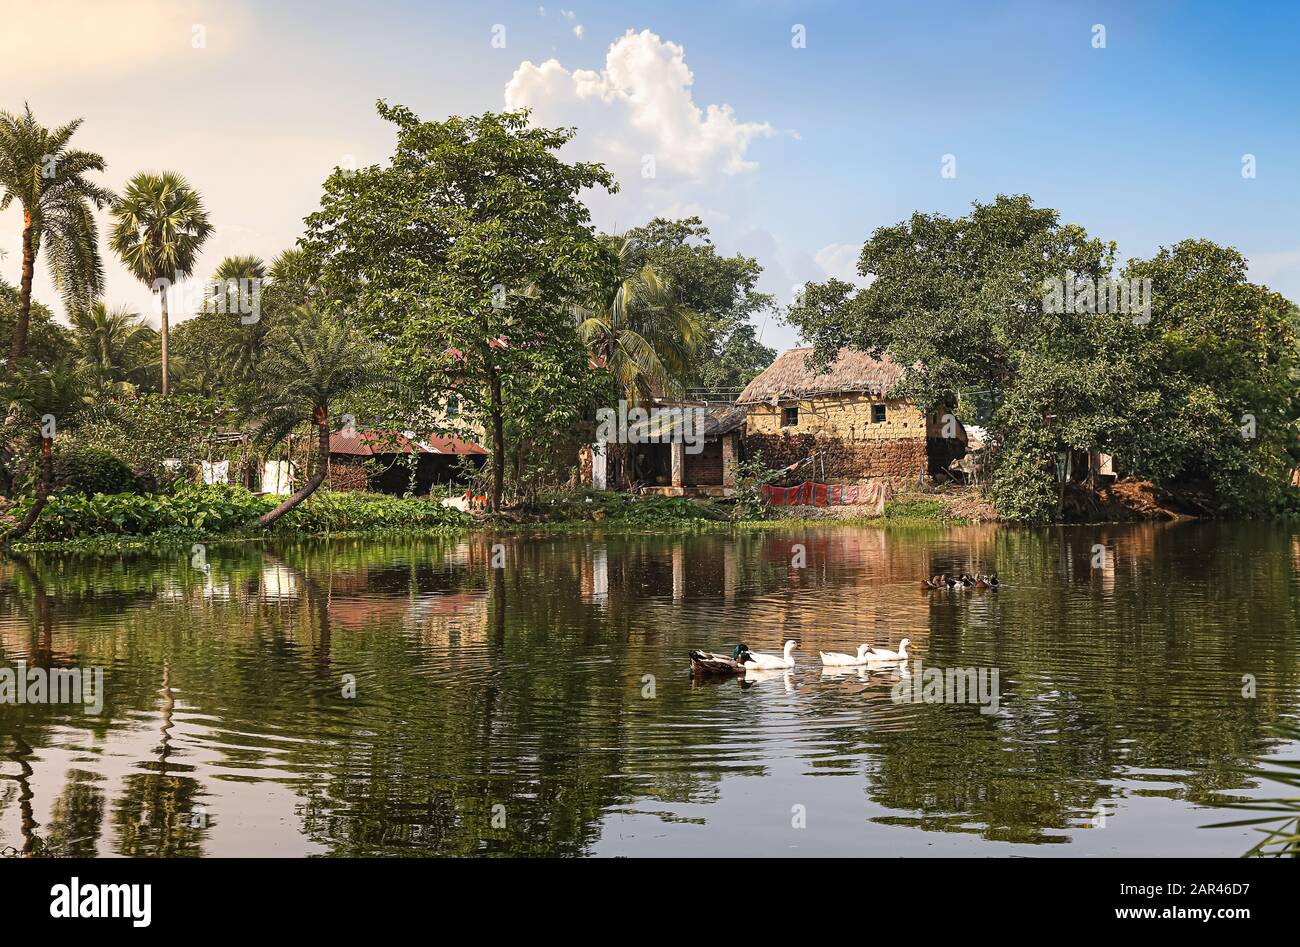 Rural India landscape with view mud huts and palm trees and ducks swimming in a village pond at sunset. Stock Photo